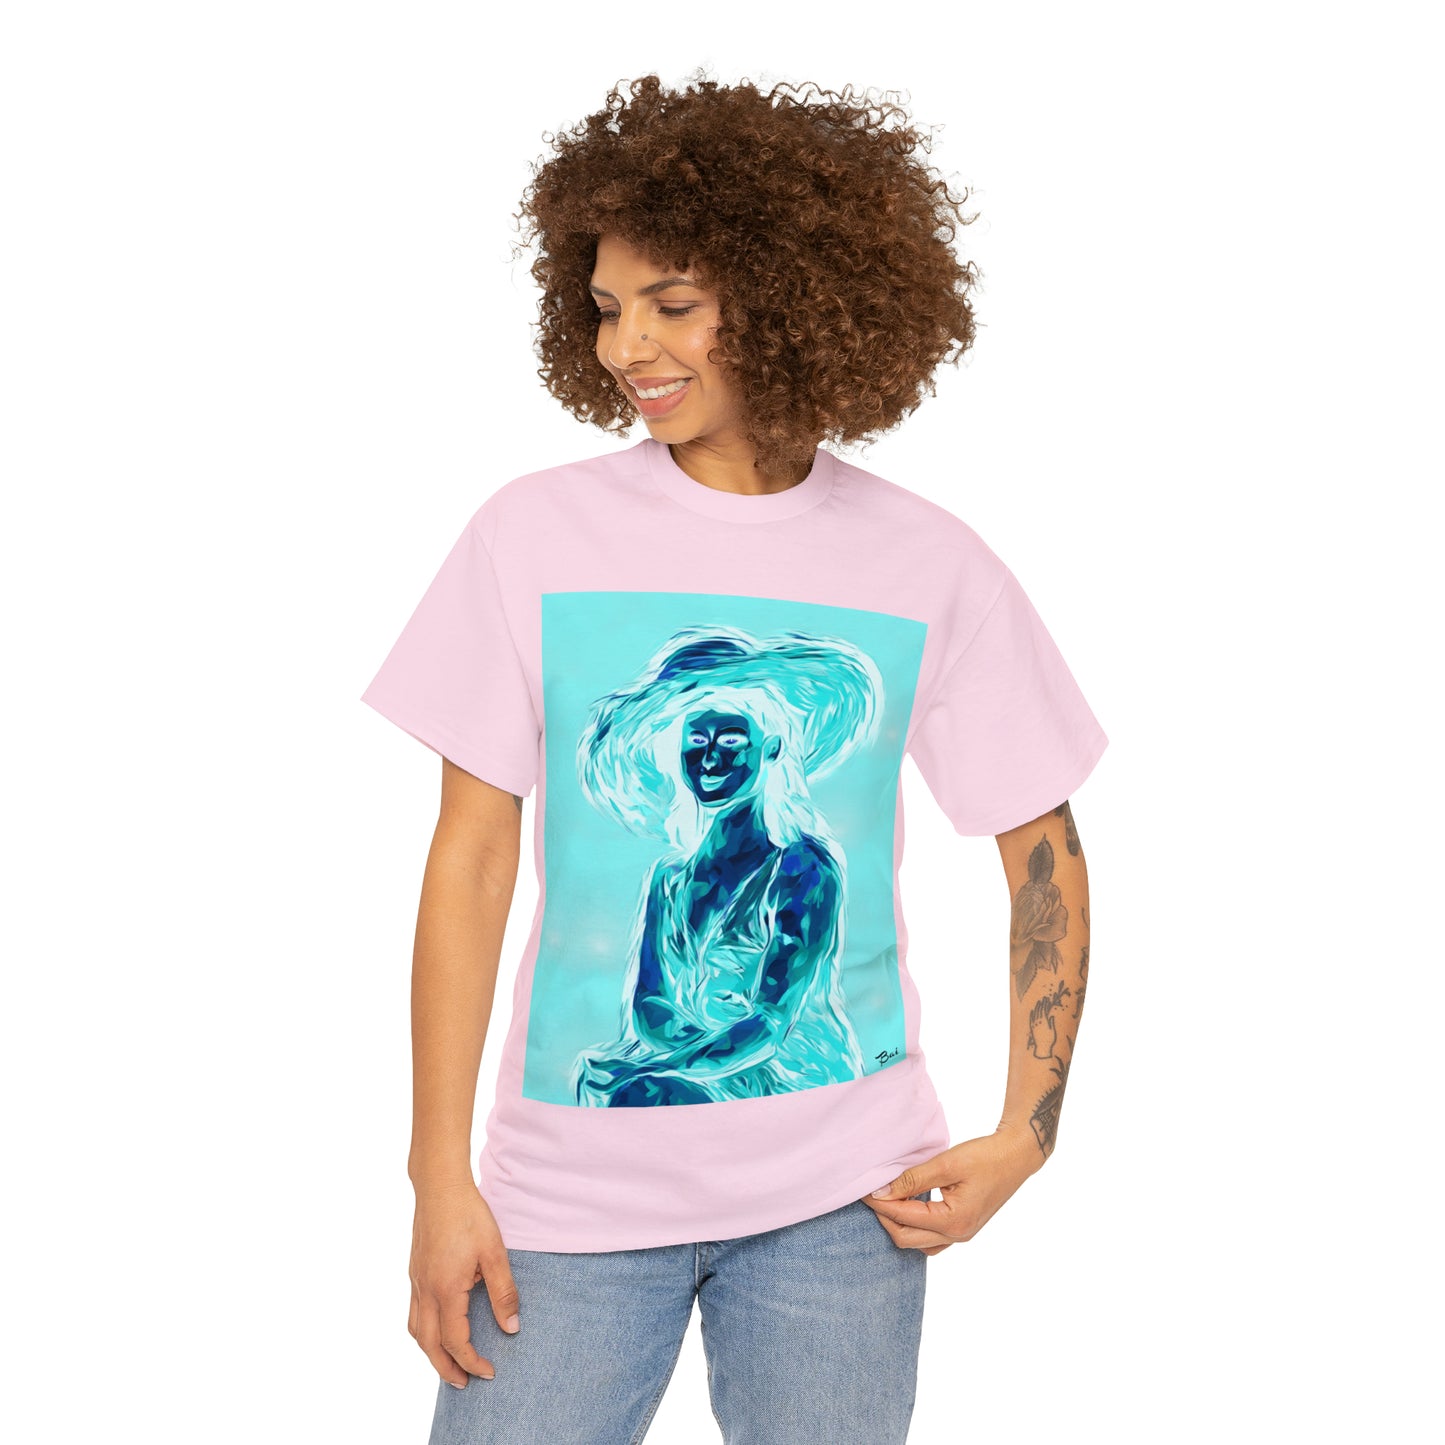 LADY IN SUN HAT (an Inversion in Red) - Airt on a Shirt  - Unisex Heavy Cotton Tee - AUS